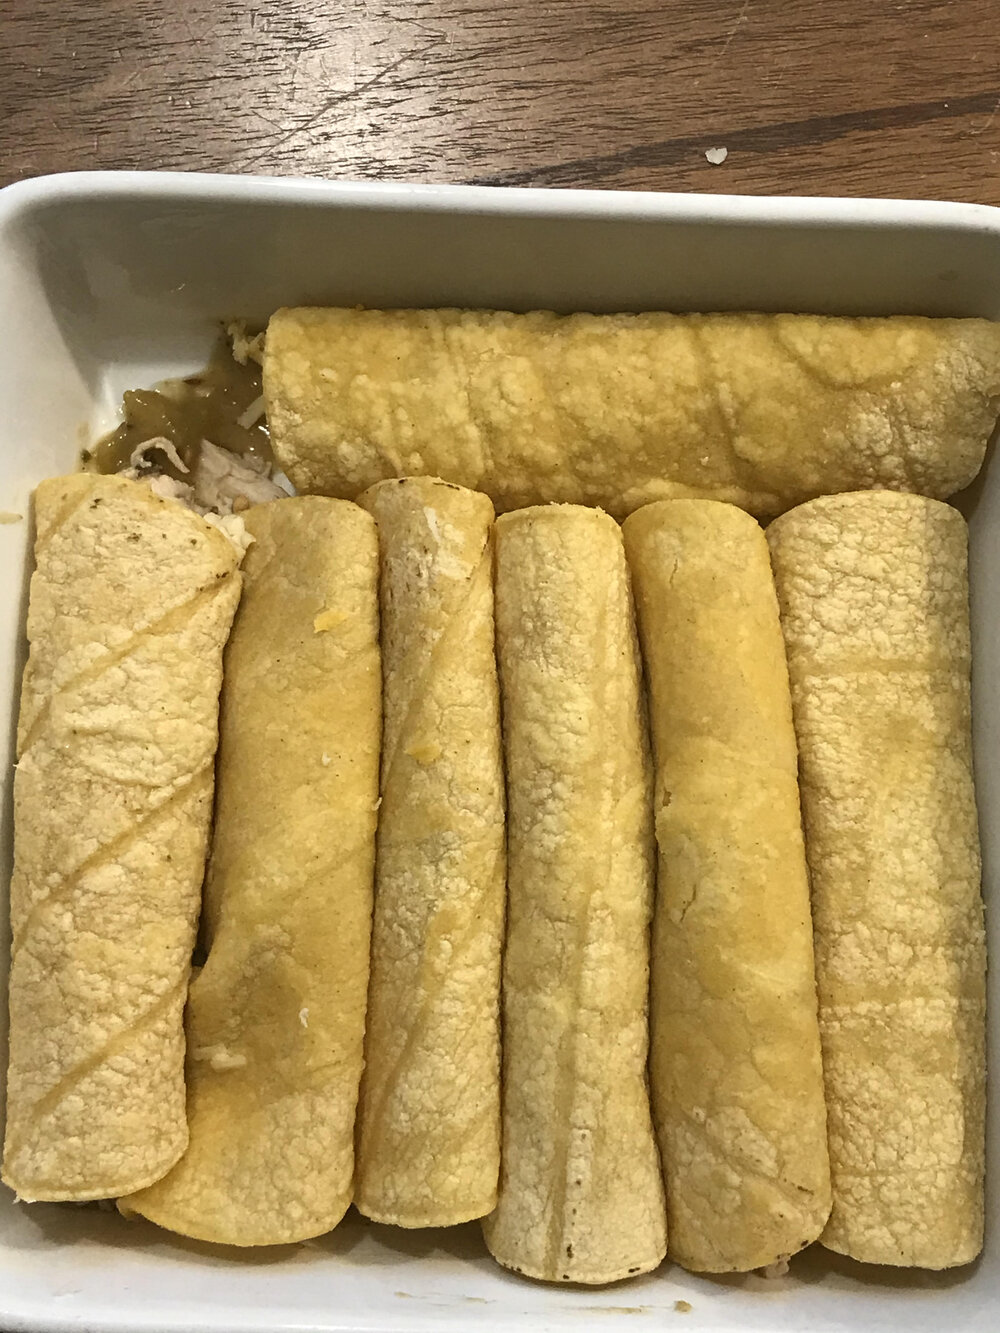 Pack the rolled tortillas snuggly into the baking dish.